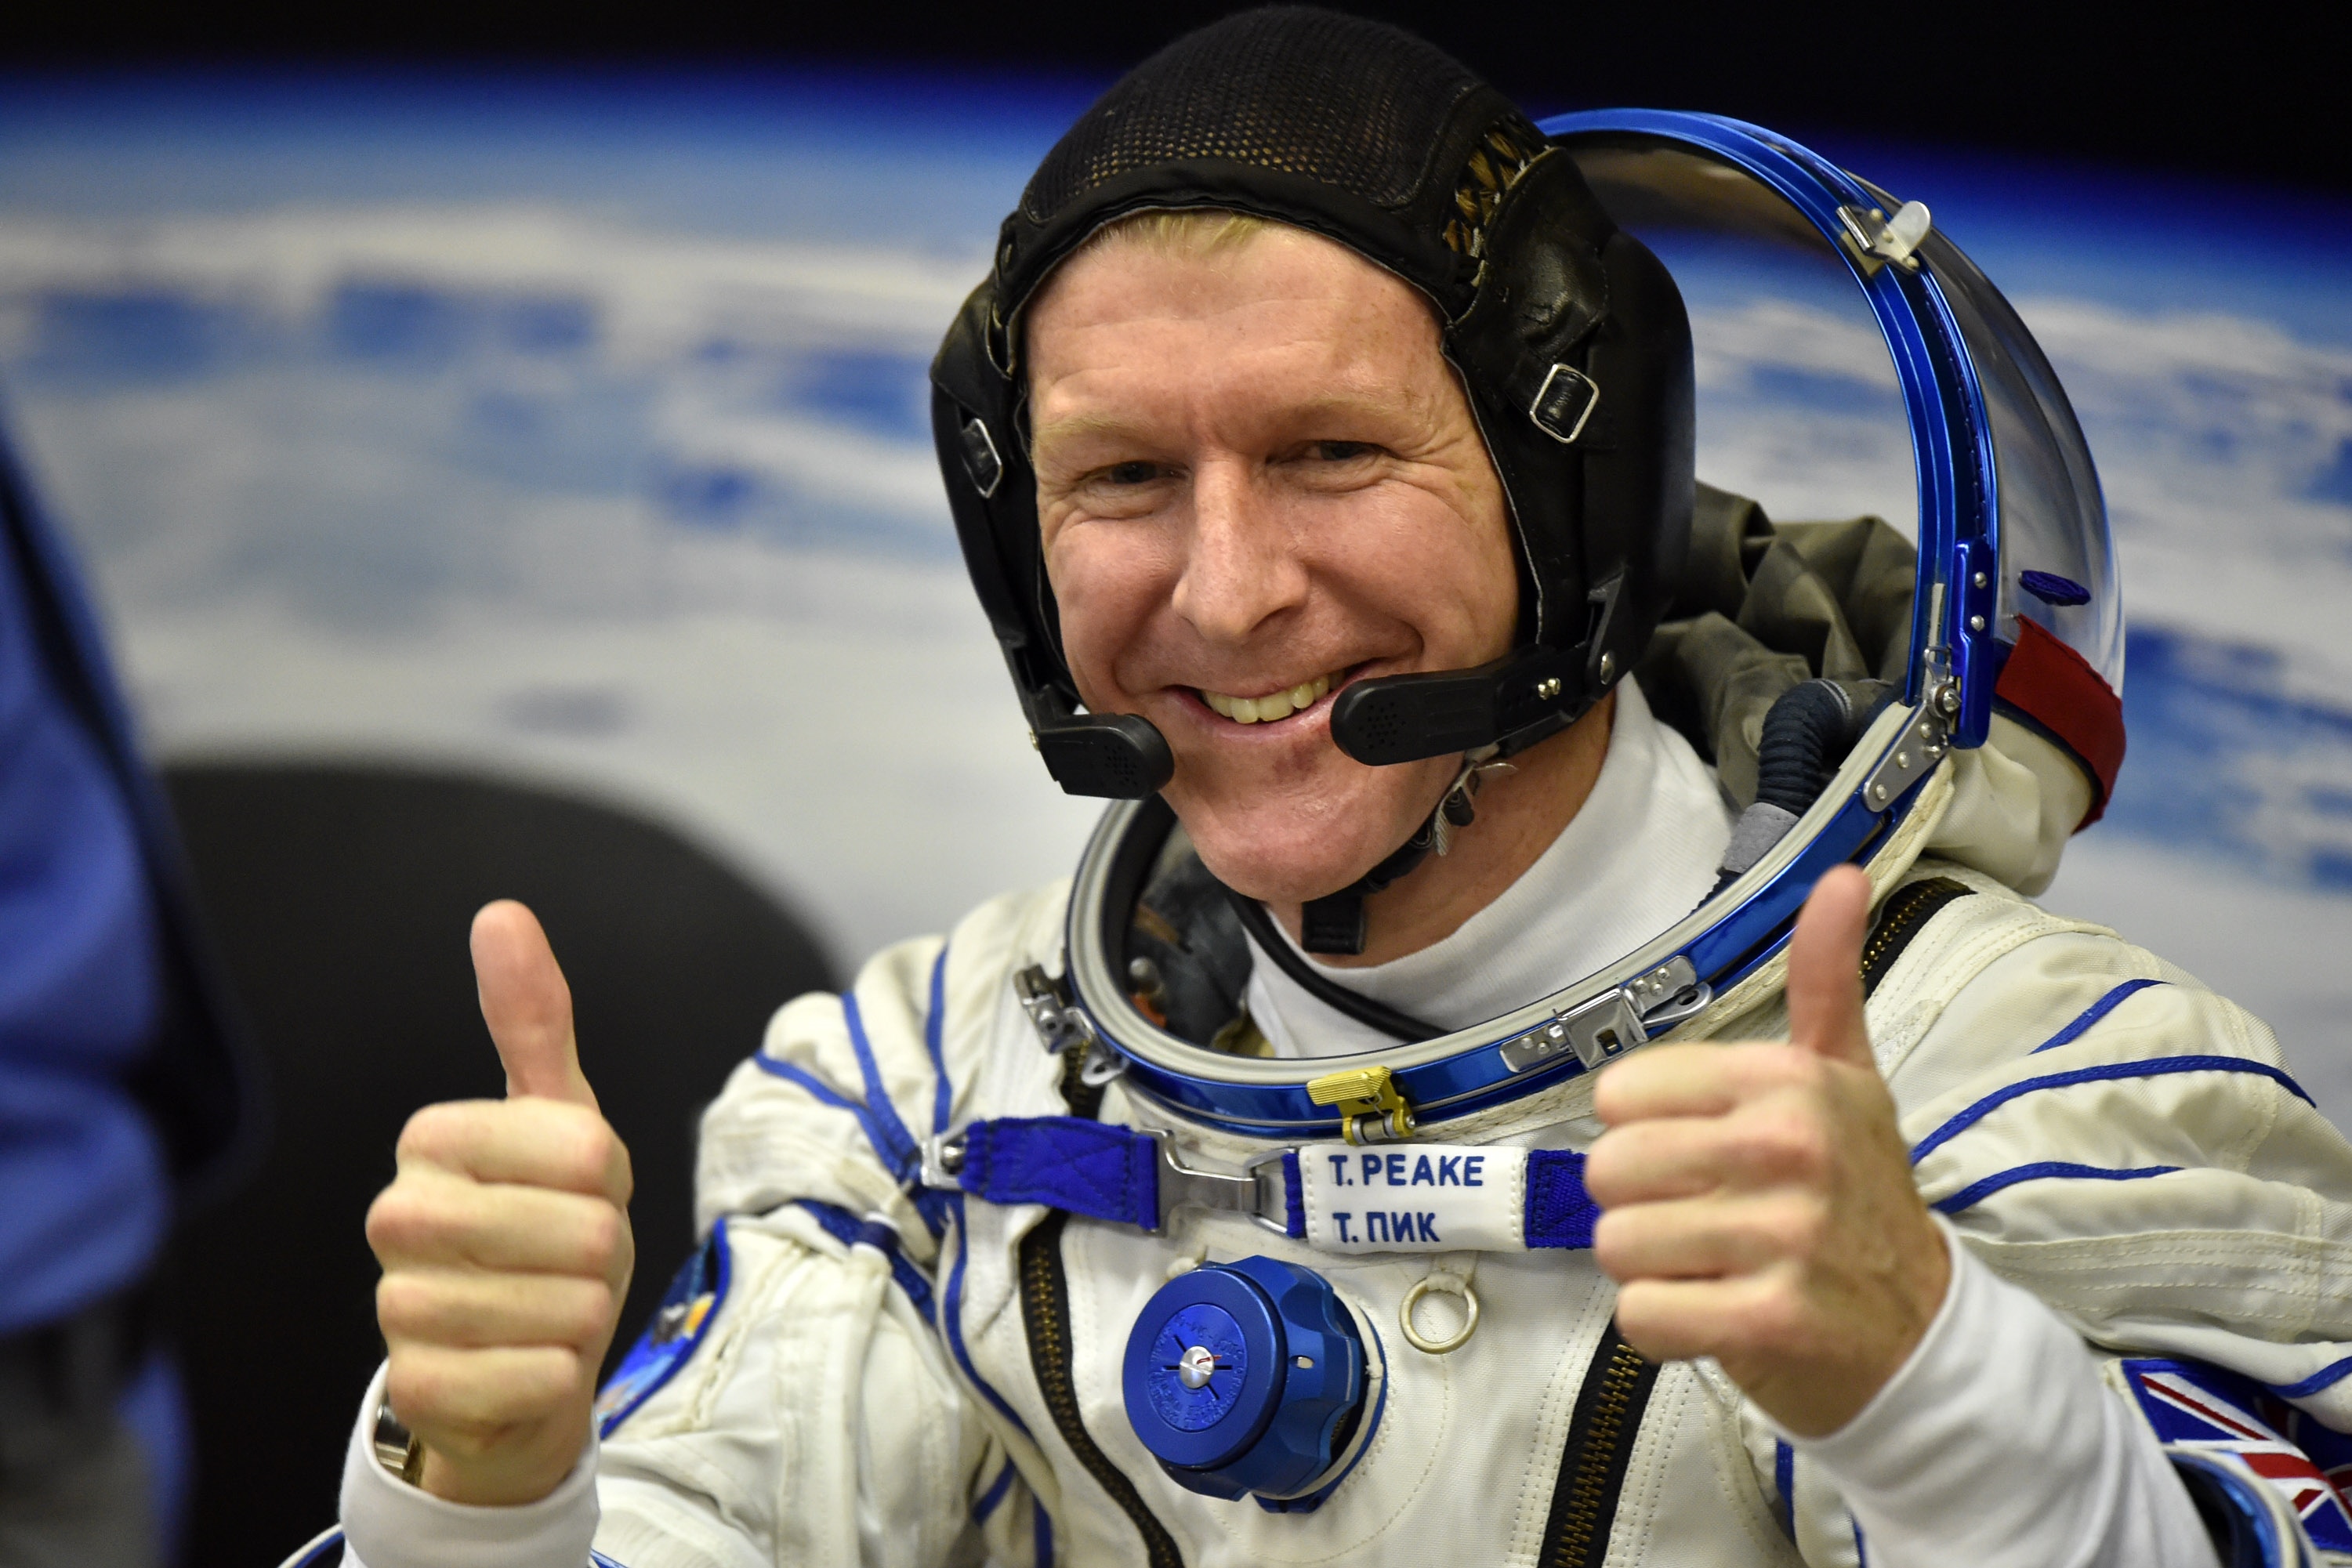 Britain's astronaut Tim Peake gestures as his space suit is tested at the Russian-leased Baikonur cosmodrome, prior to blasting off to the International Space Station (ISS), on Dec. 15, 2015. (Kirill Kudryavtsev—AFP/Getty Images)